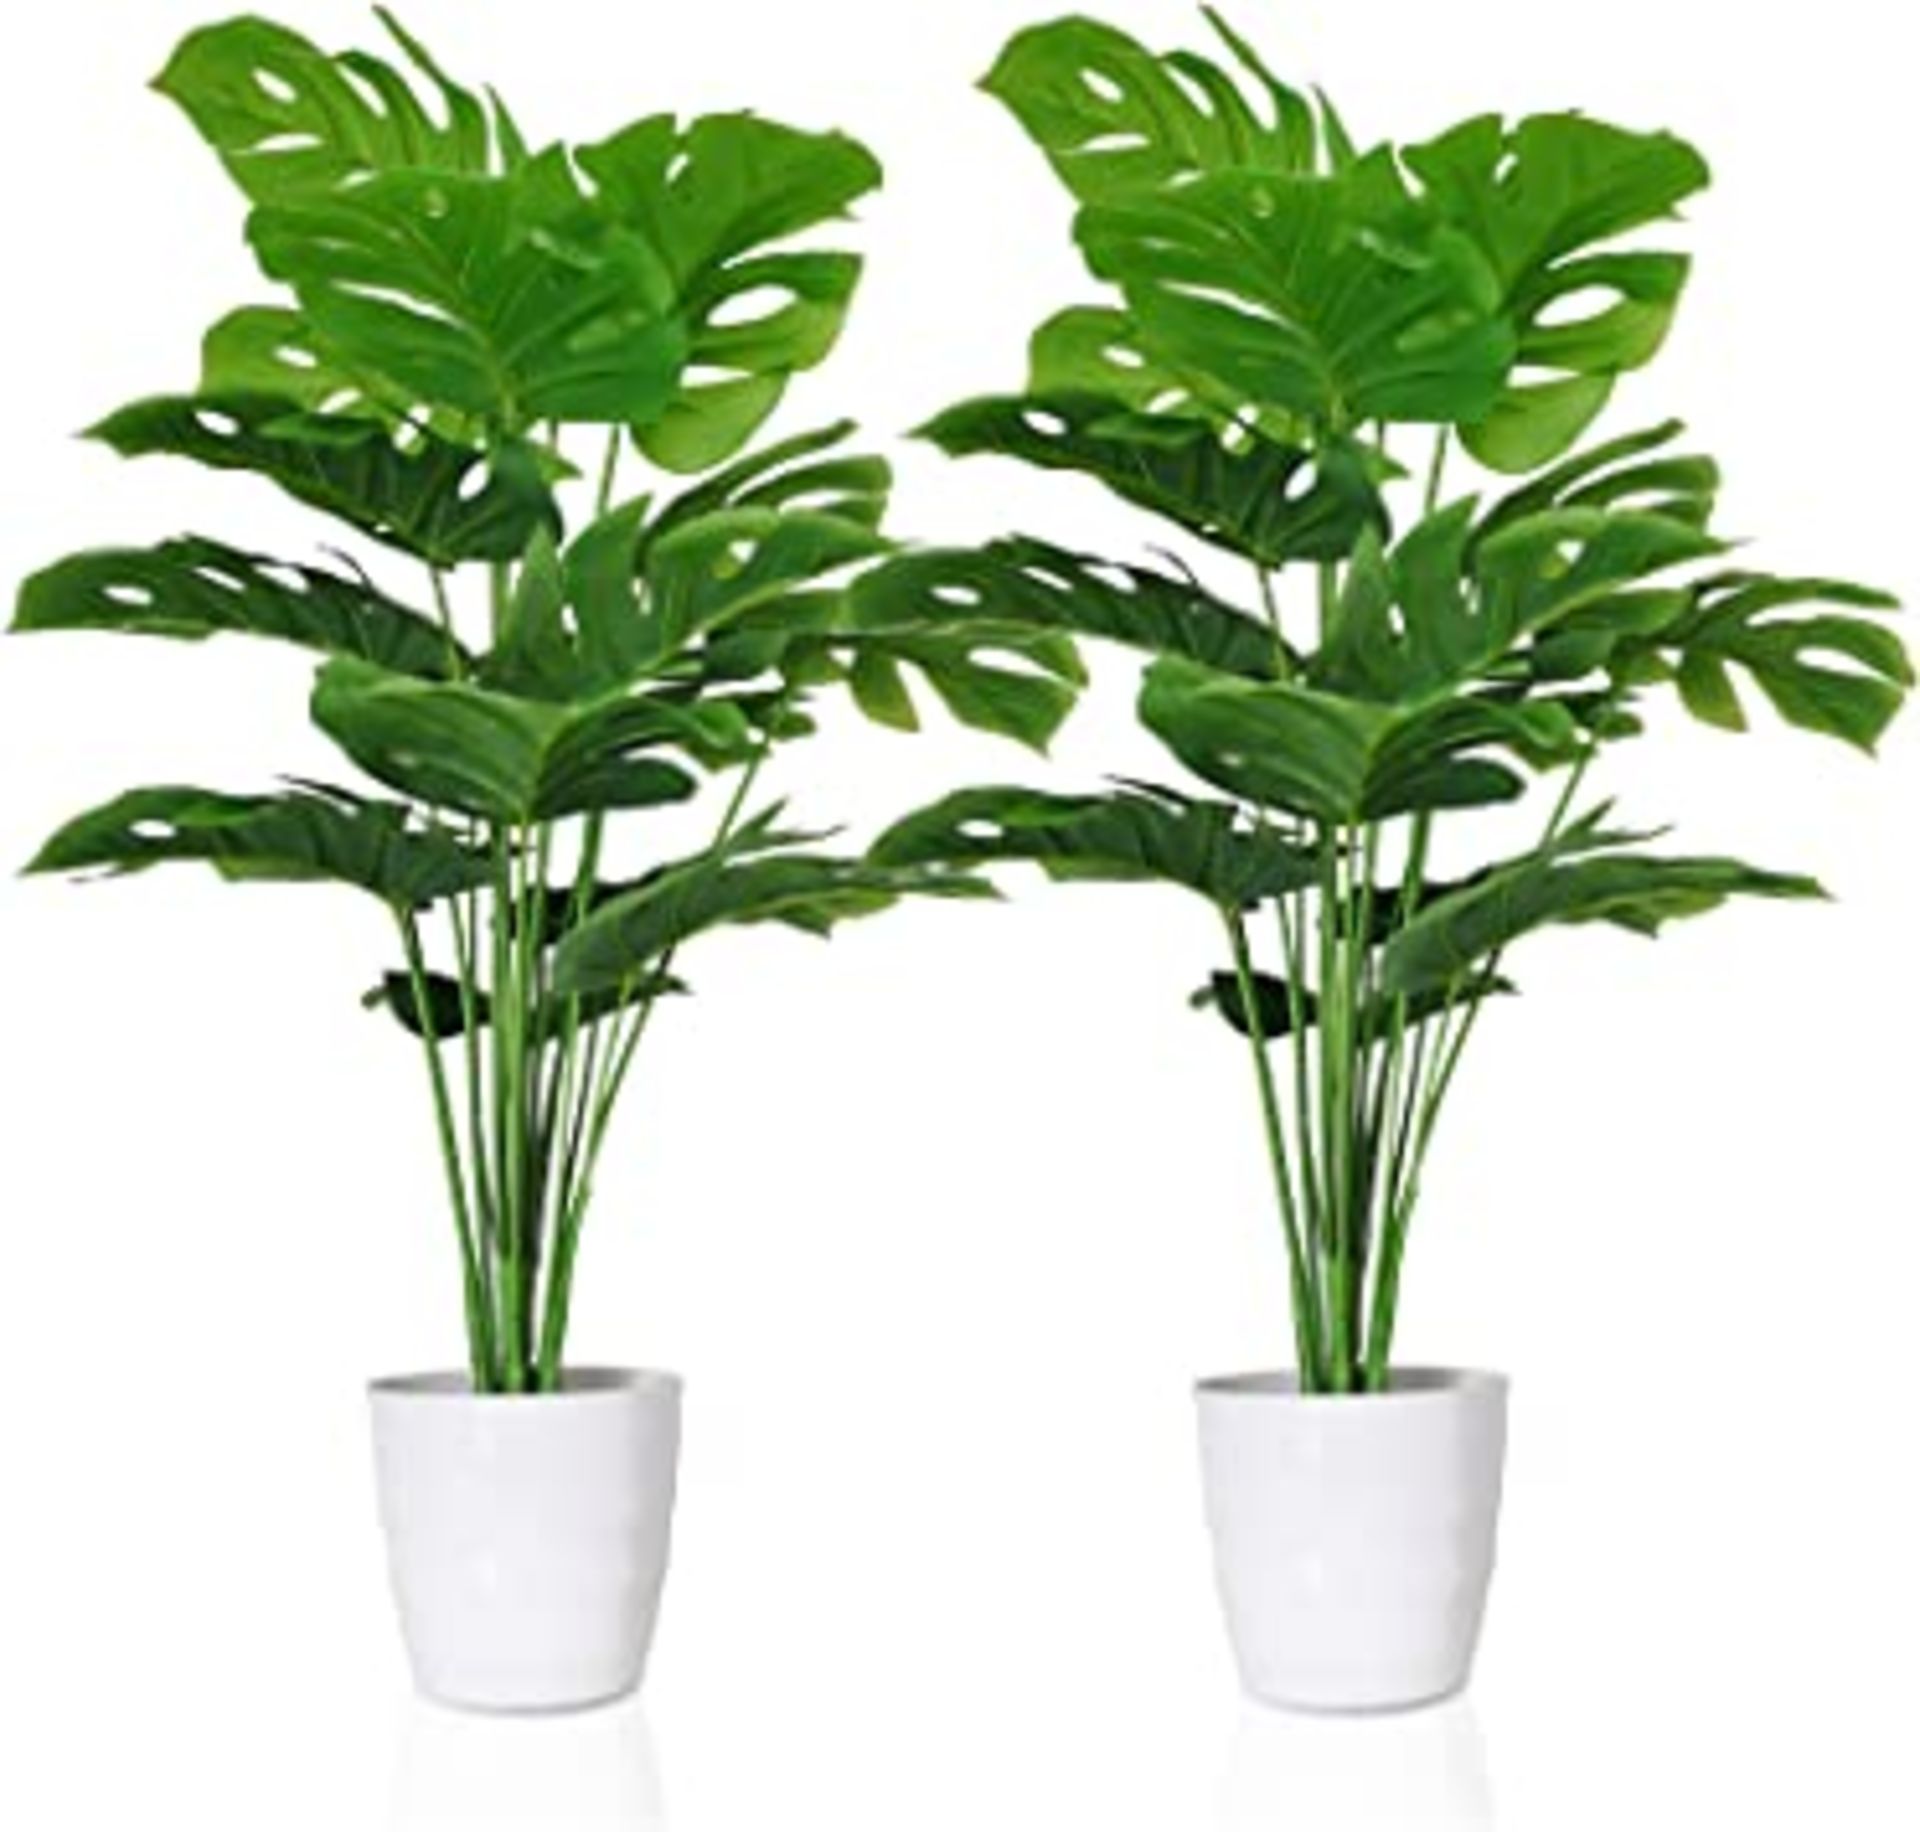 RRP-£11 Artificial Plants in Boho Style Ceramic Pot, 2 Packs of 7" Tall Faux Potted Plants in Pot wi